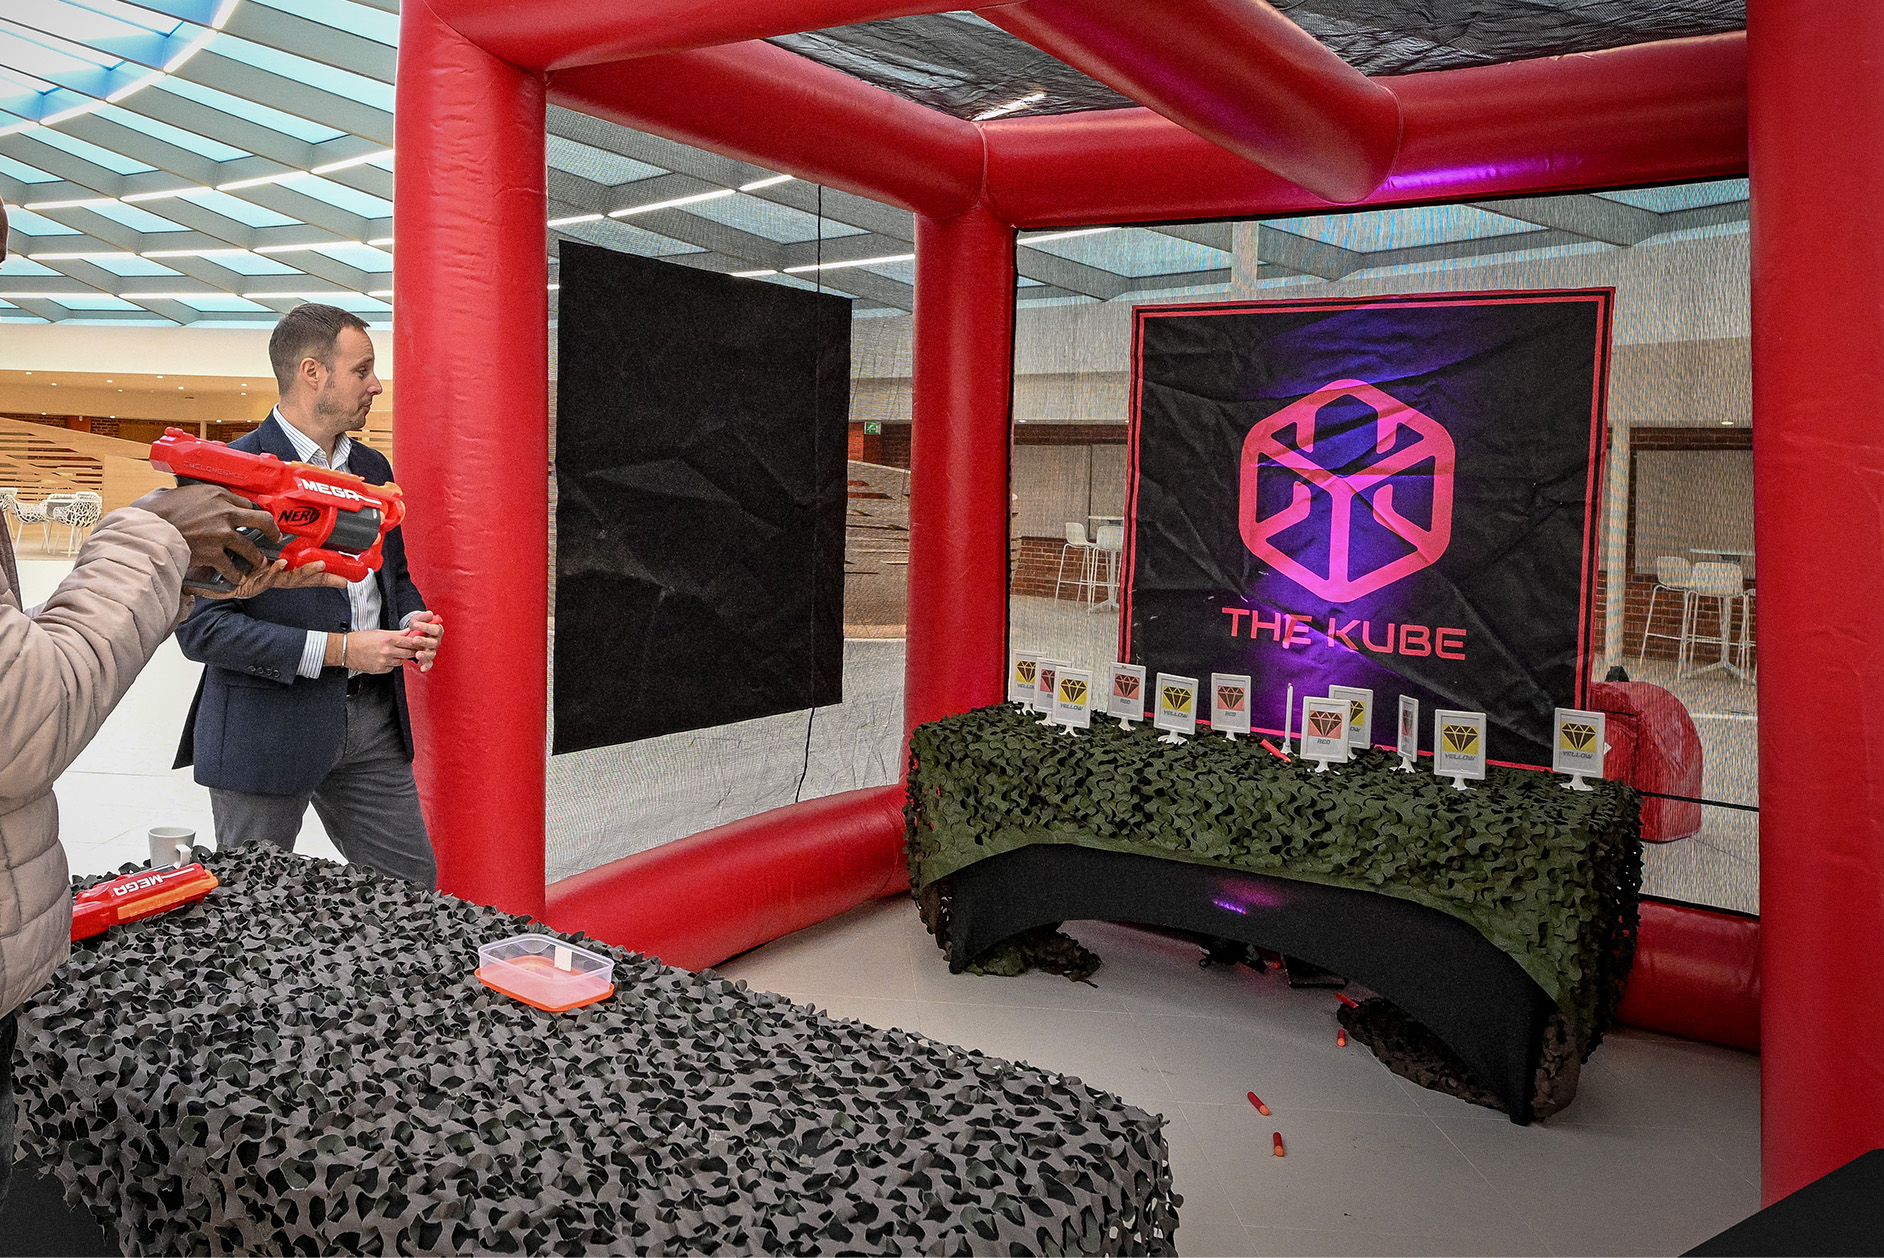 'The Kube' by Zing Events, with paper targets top be shot at with a Nerf gun